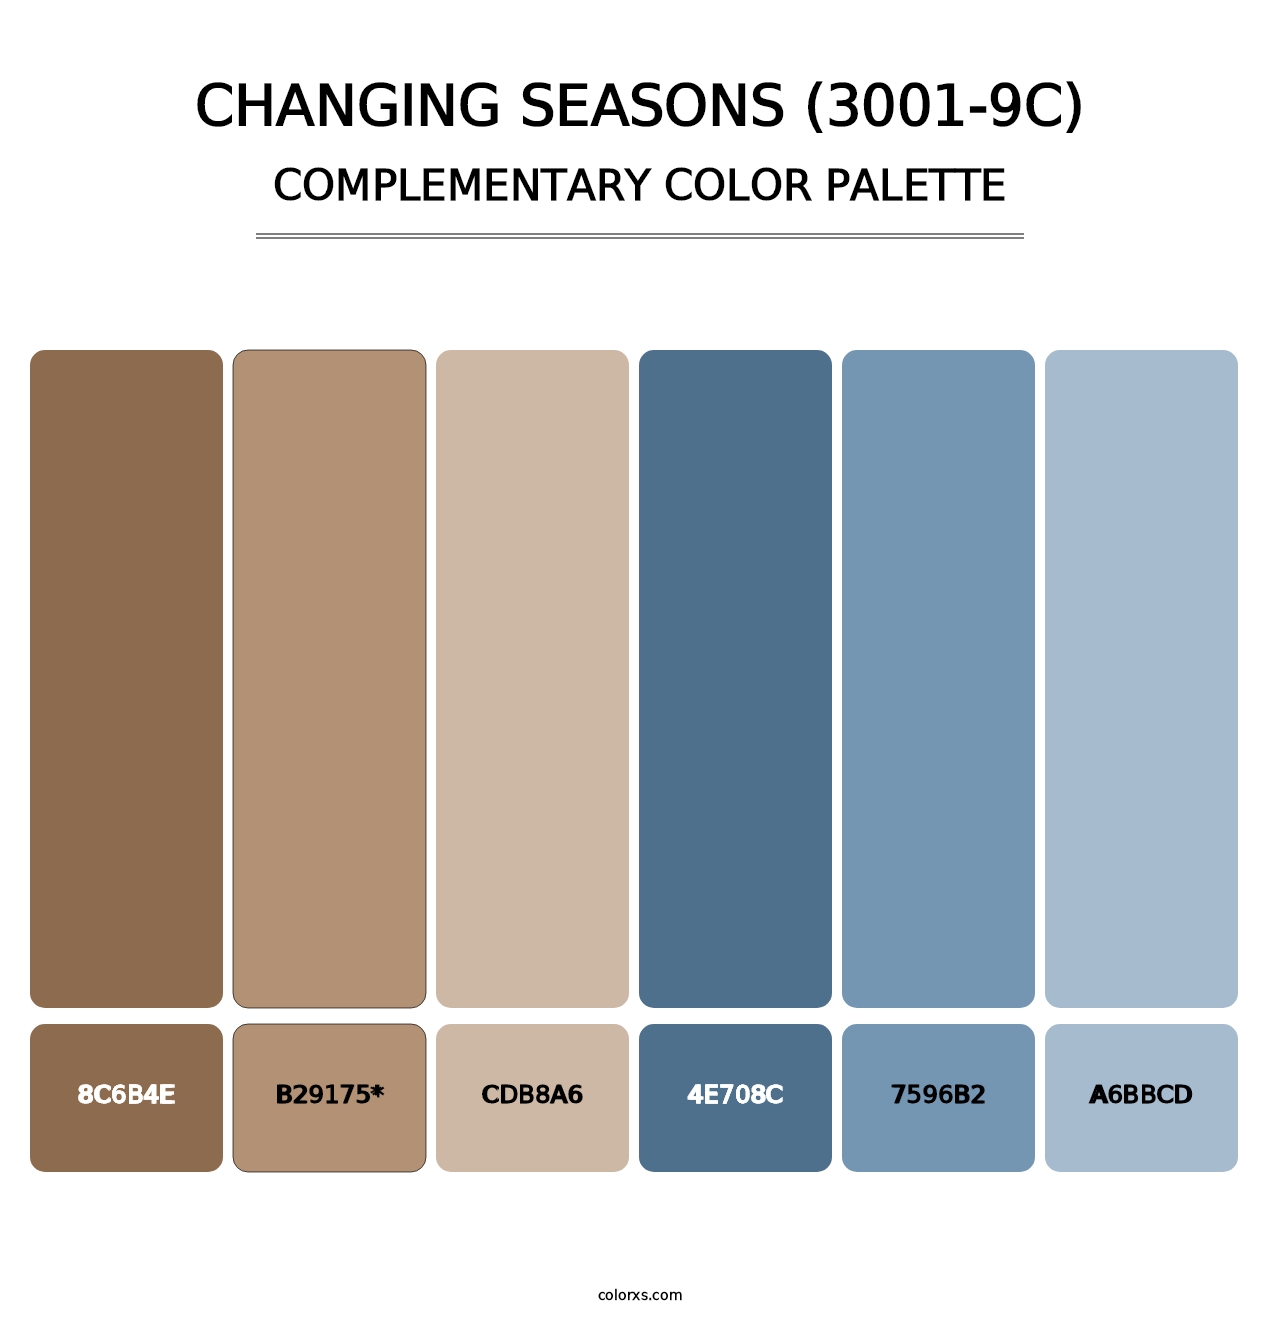 Changing Seasons (3001-9C) - Complementary Color Palette